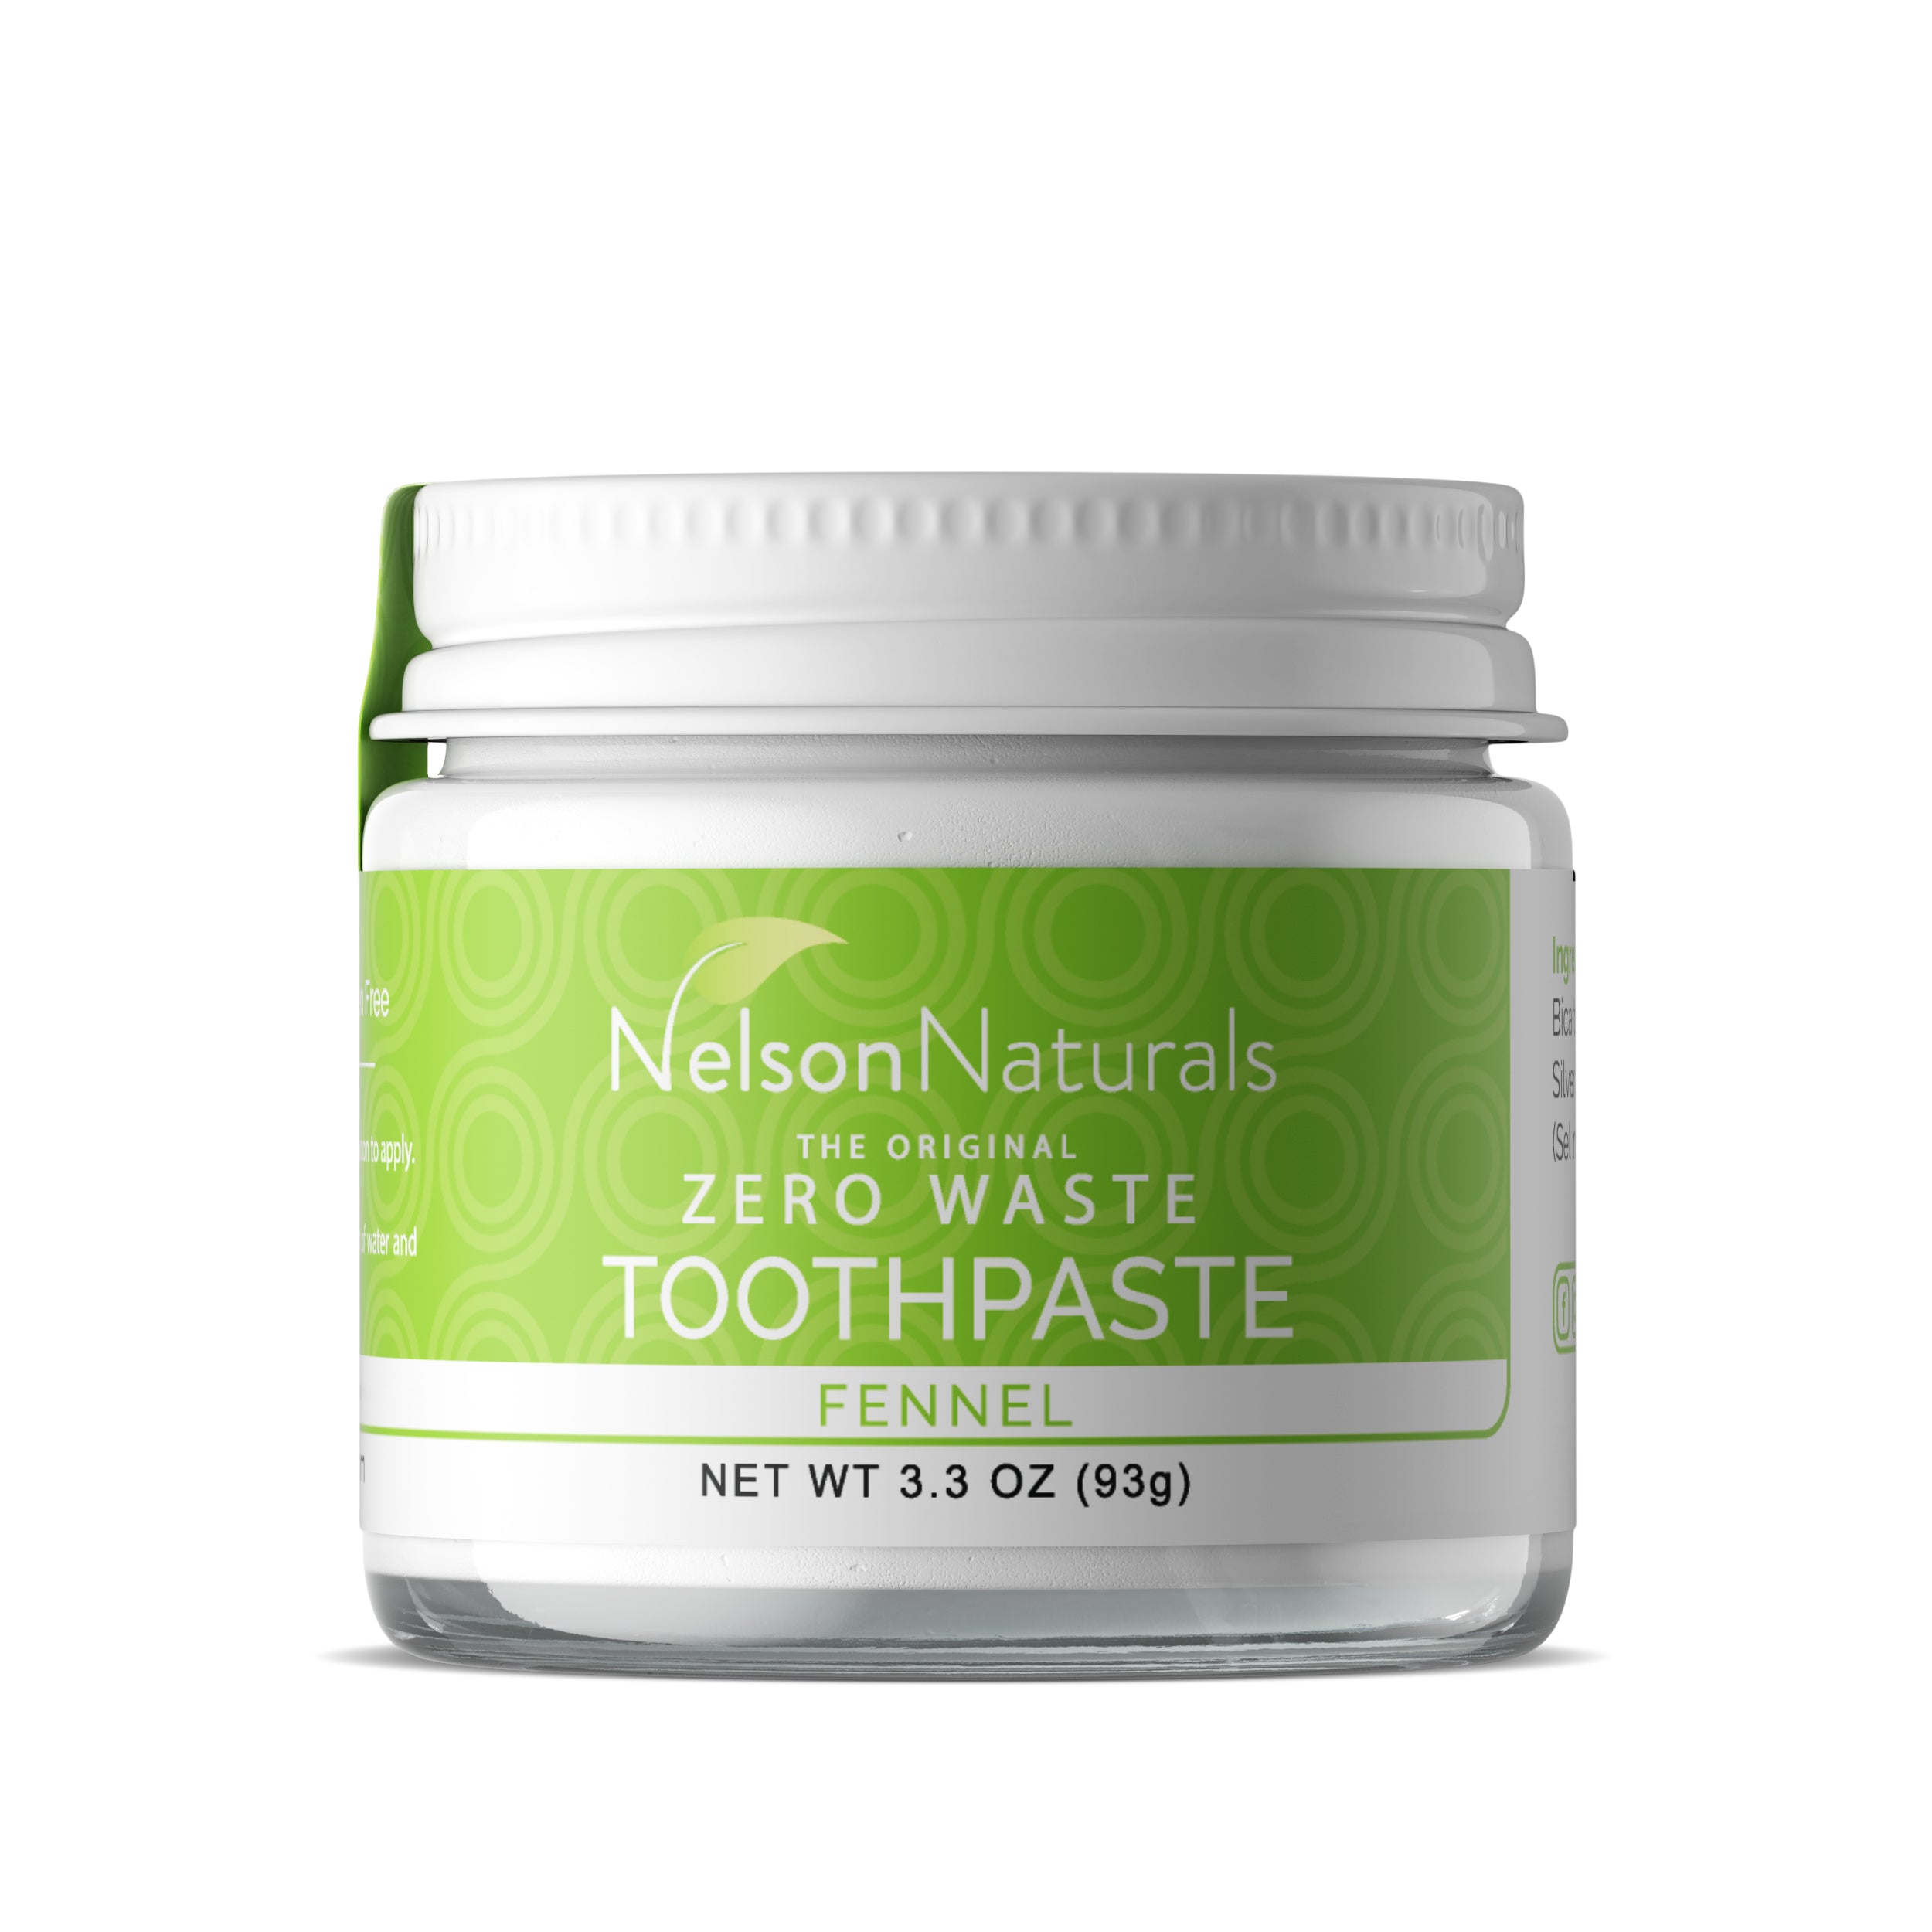 Fennel 93g - WHOLESALE Toothpaste - nelsonnaturals remineralizing toothpaste